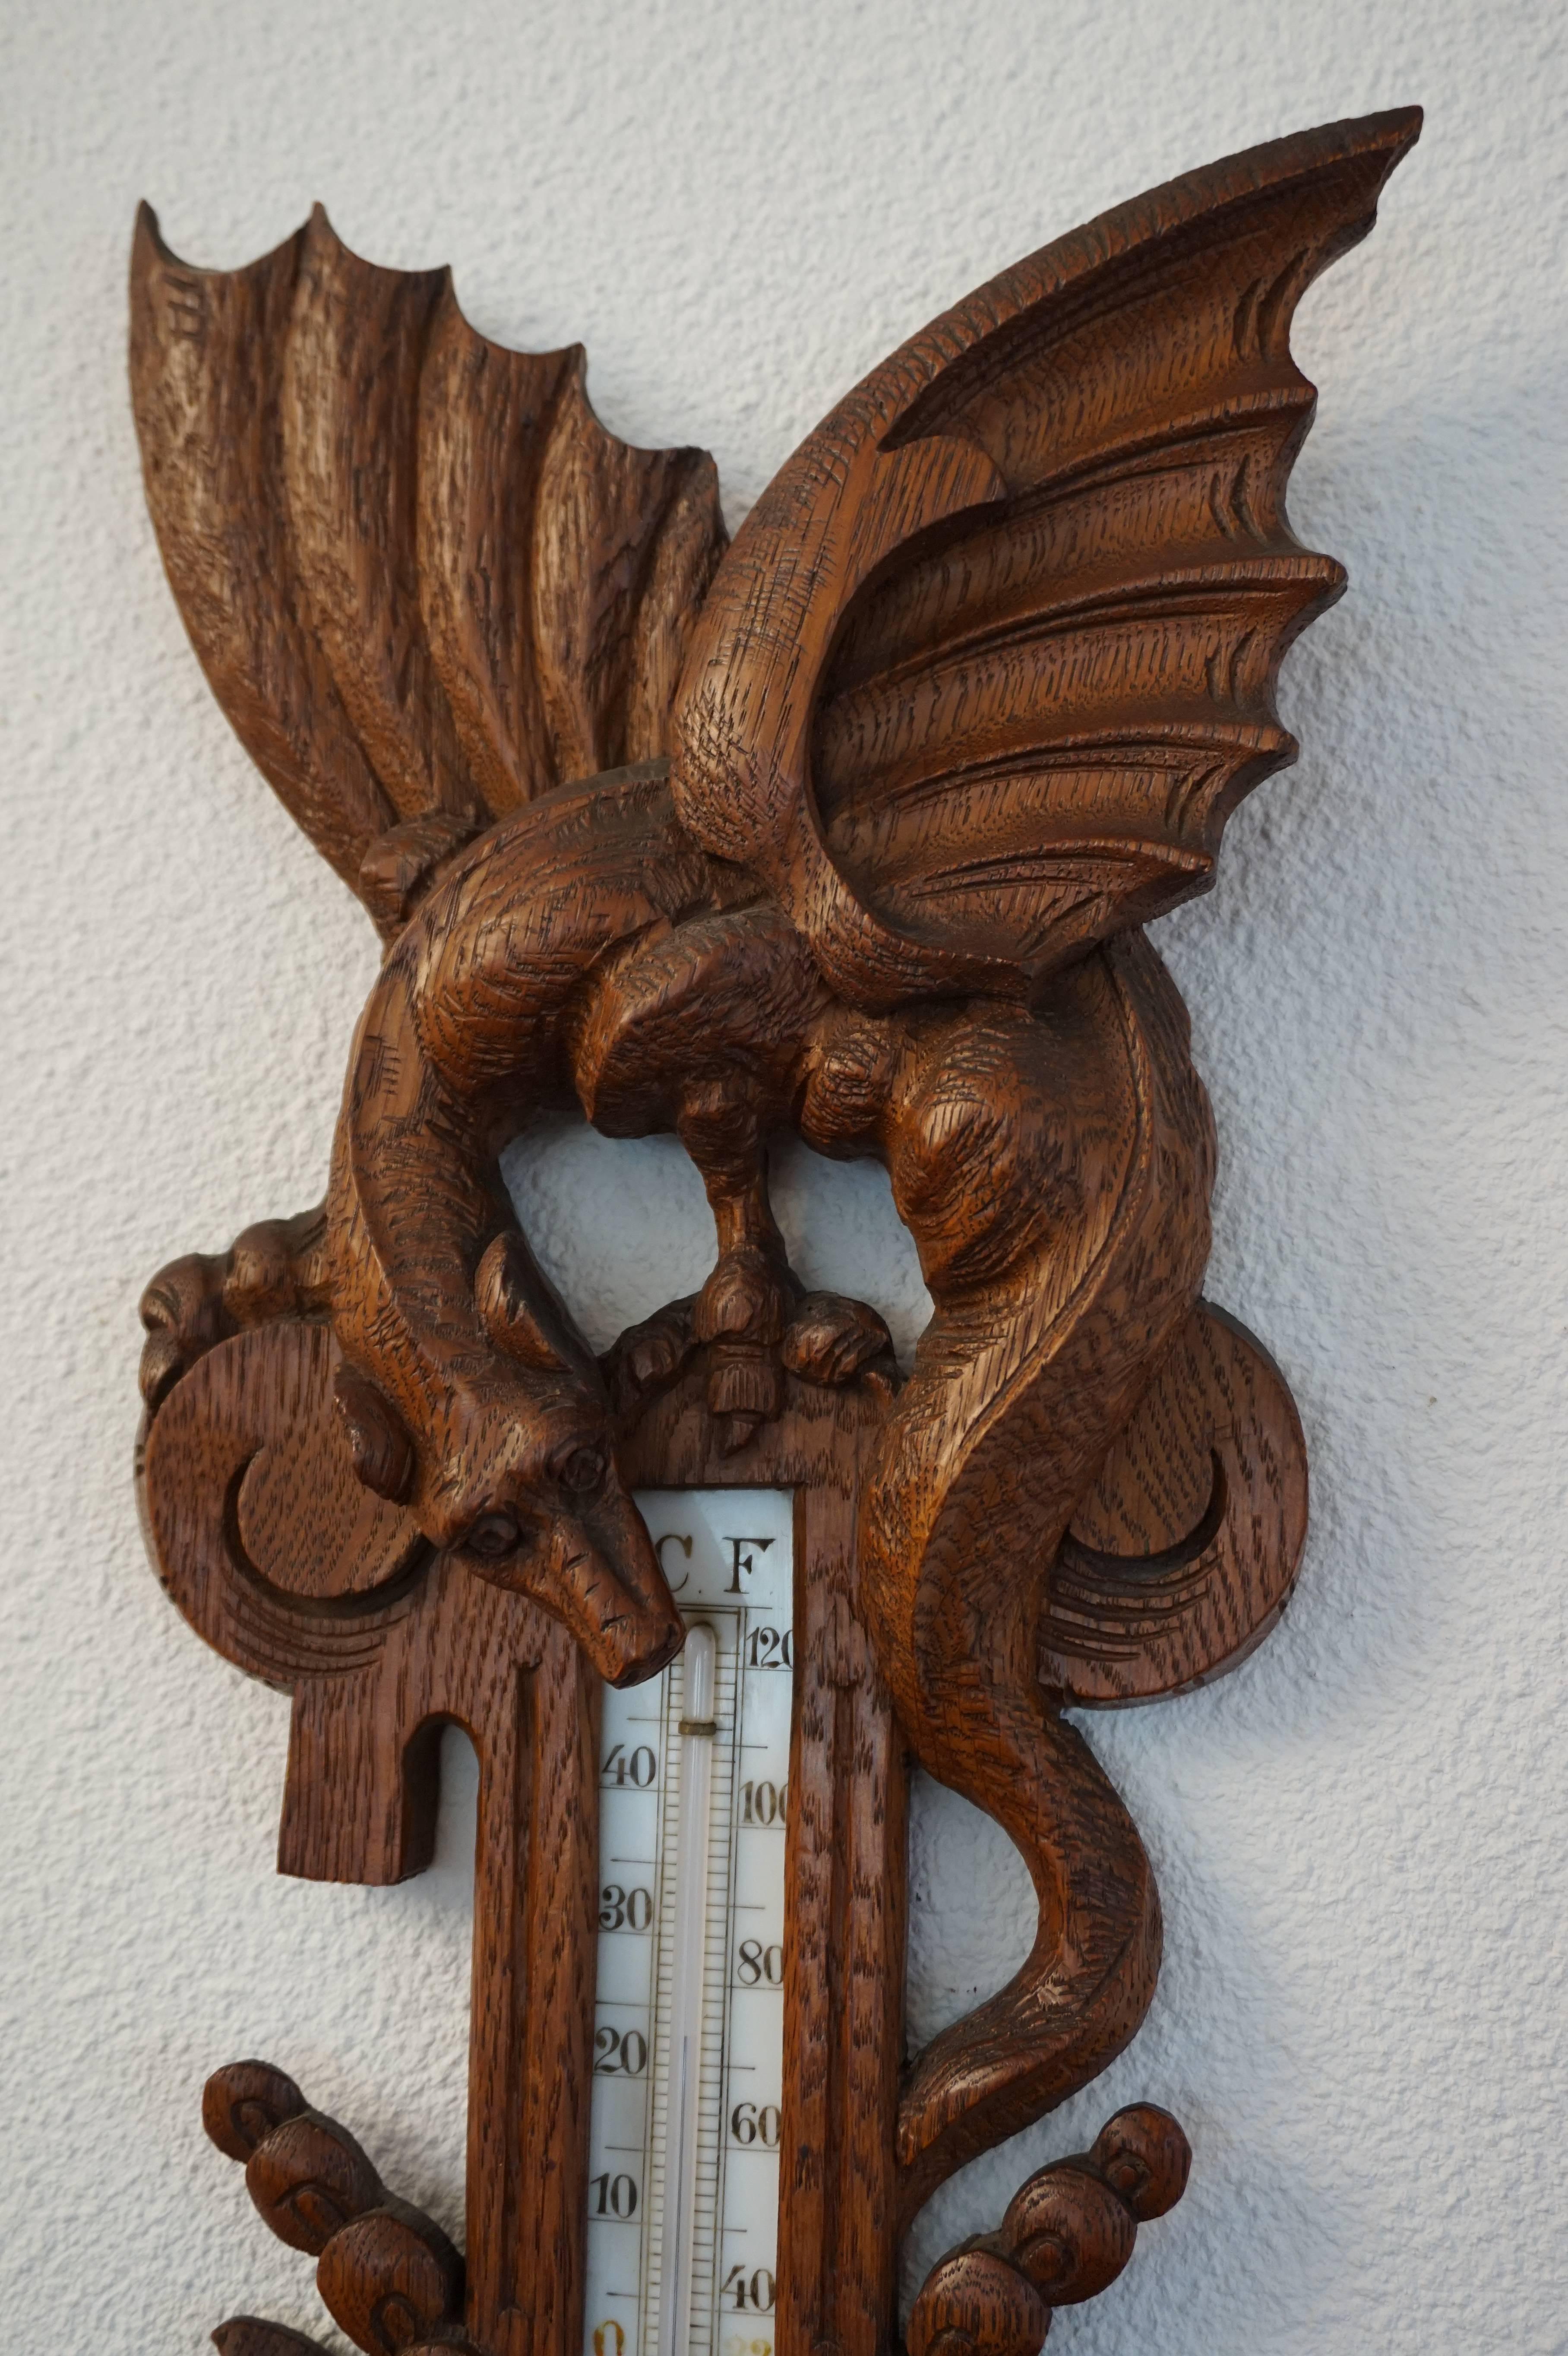 This rare and decorative barometer with thermometer is in excellent condition!

Have you ever seen a barometer with a carved dragon? This rare piece was probably custom-made for a person who had a passion for dragons. It could also be that the